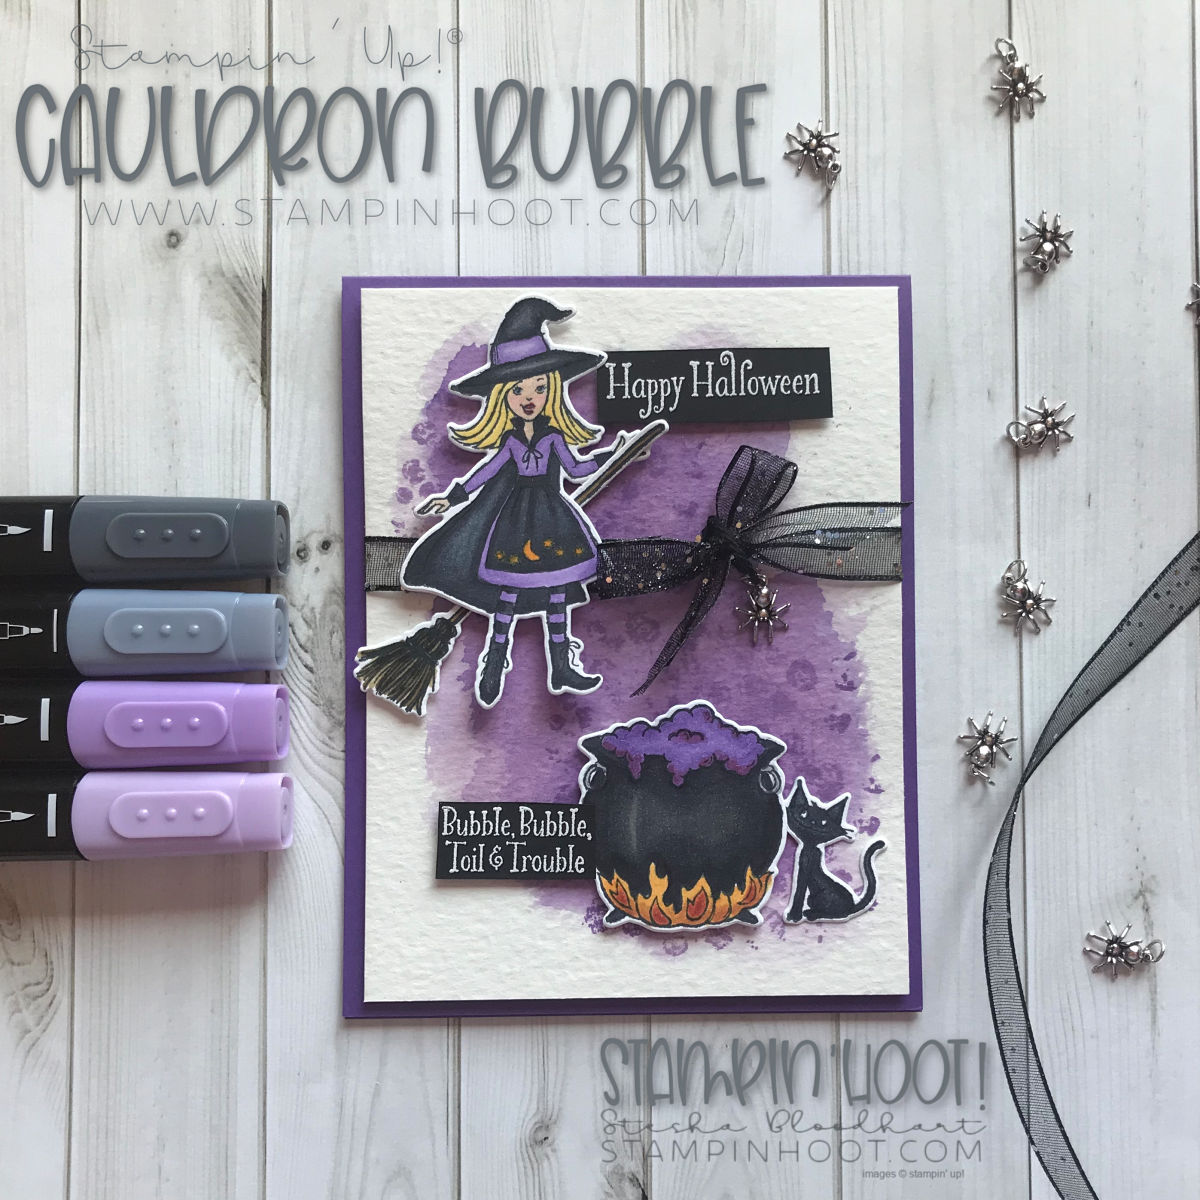 Cauldron Bubble Bundle by Stampin' Up! from the 2018 Holiday Catalog. Handmade Halloween Card by Stesha Bloodhart, Stampin' Hoot! #steshabloodhart #stampinhoot